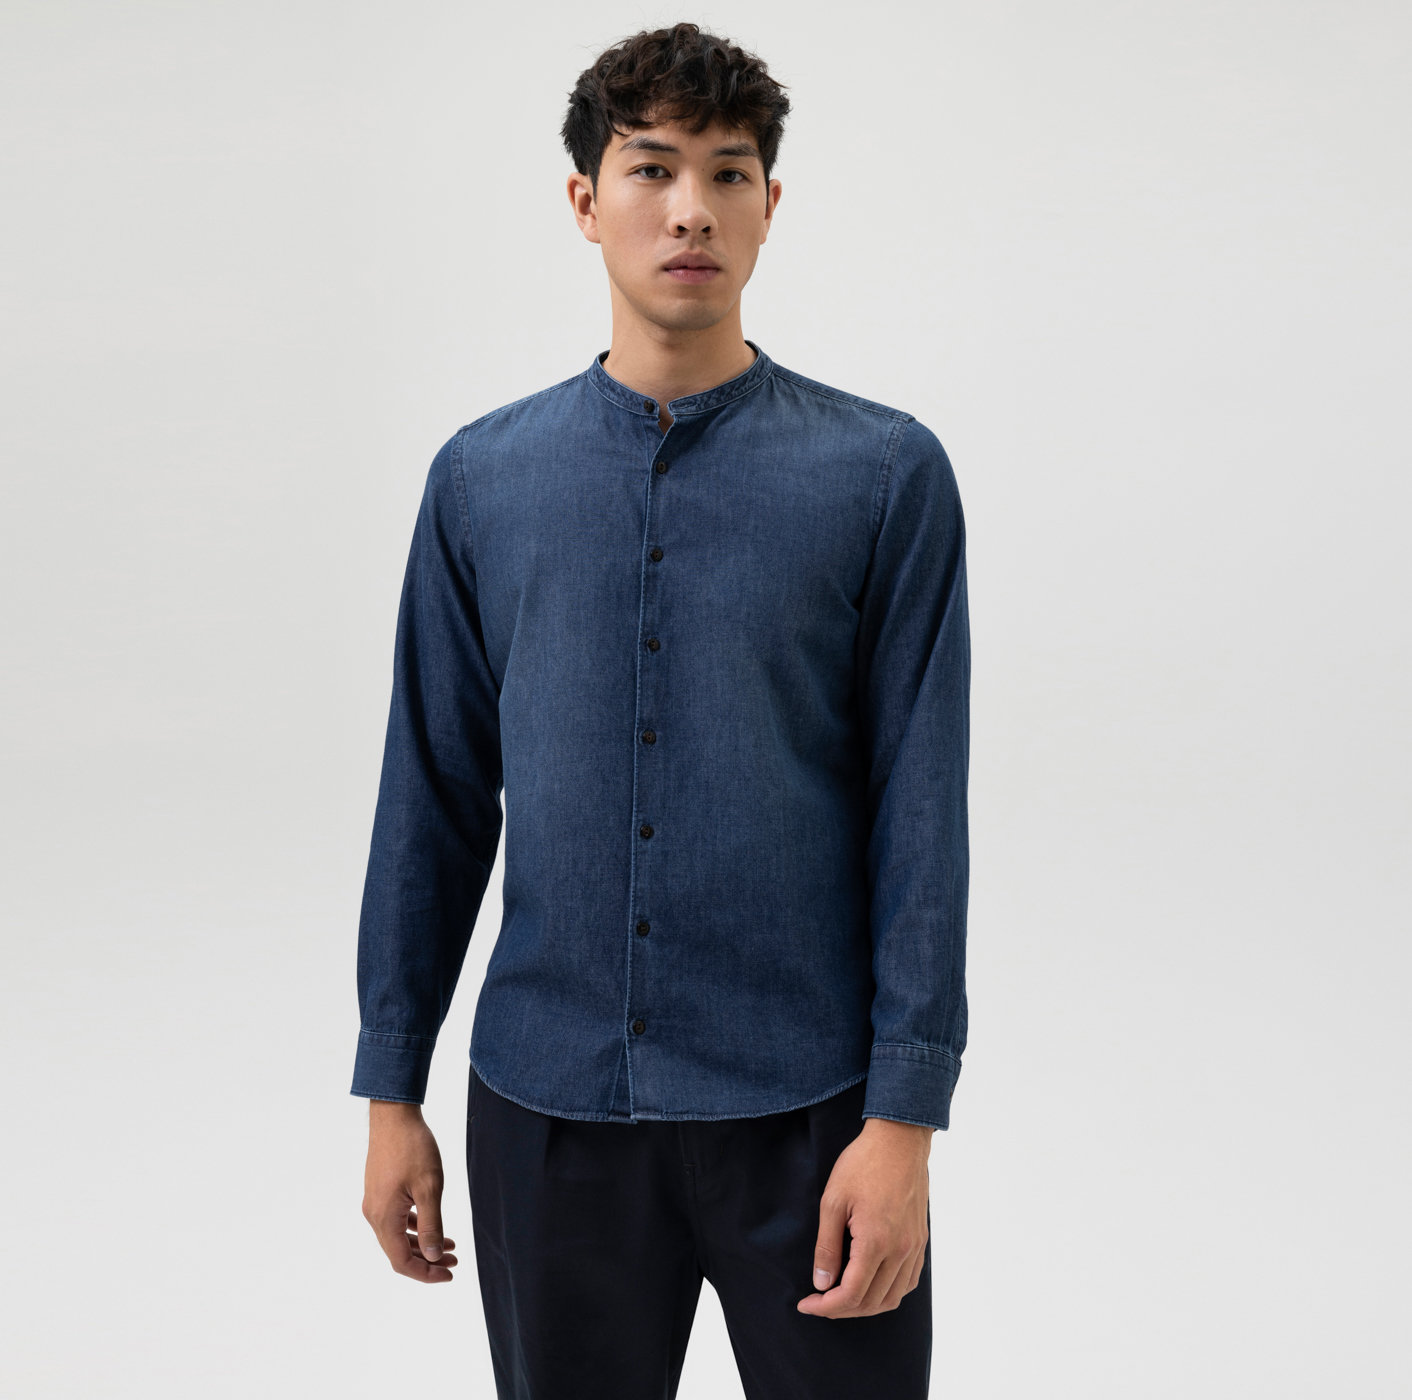 body Casual, 32402496 | - | Indigo collar Five Level Casual Smart fit, OLYMP Stand-up shirt